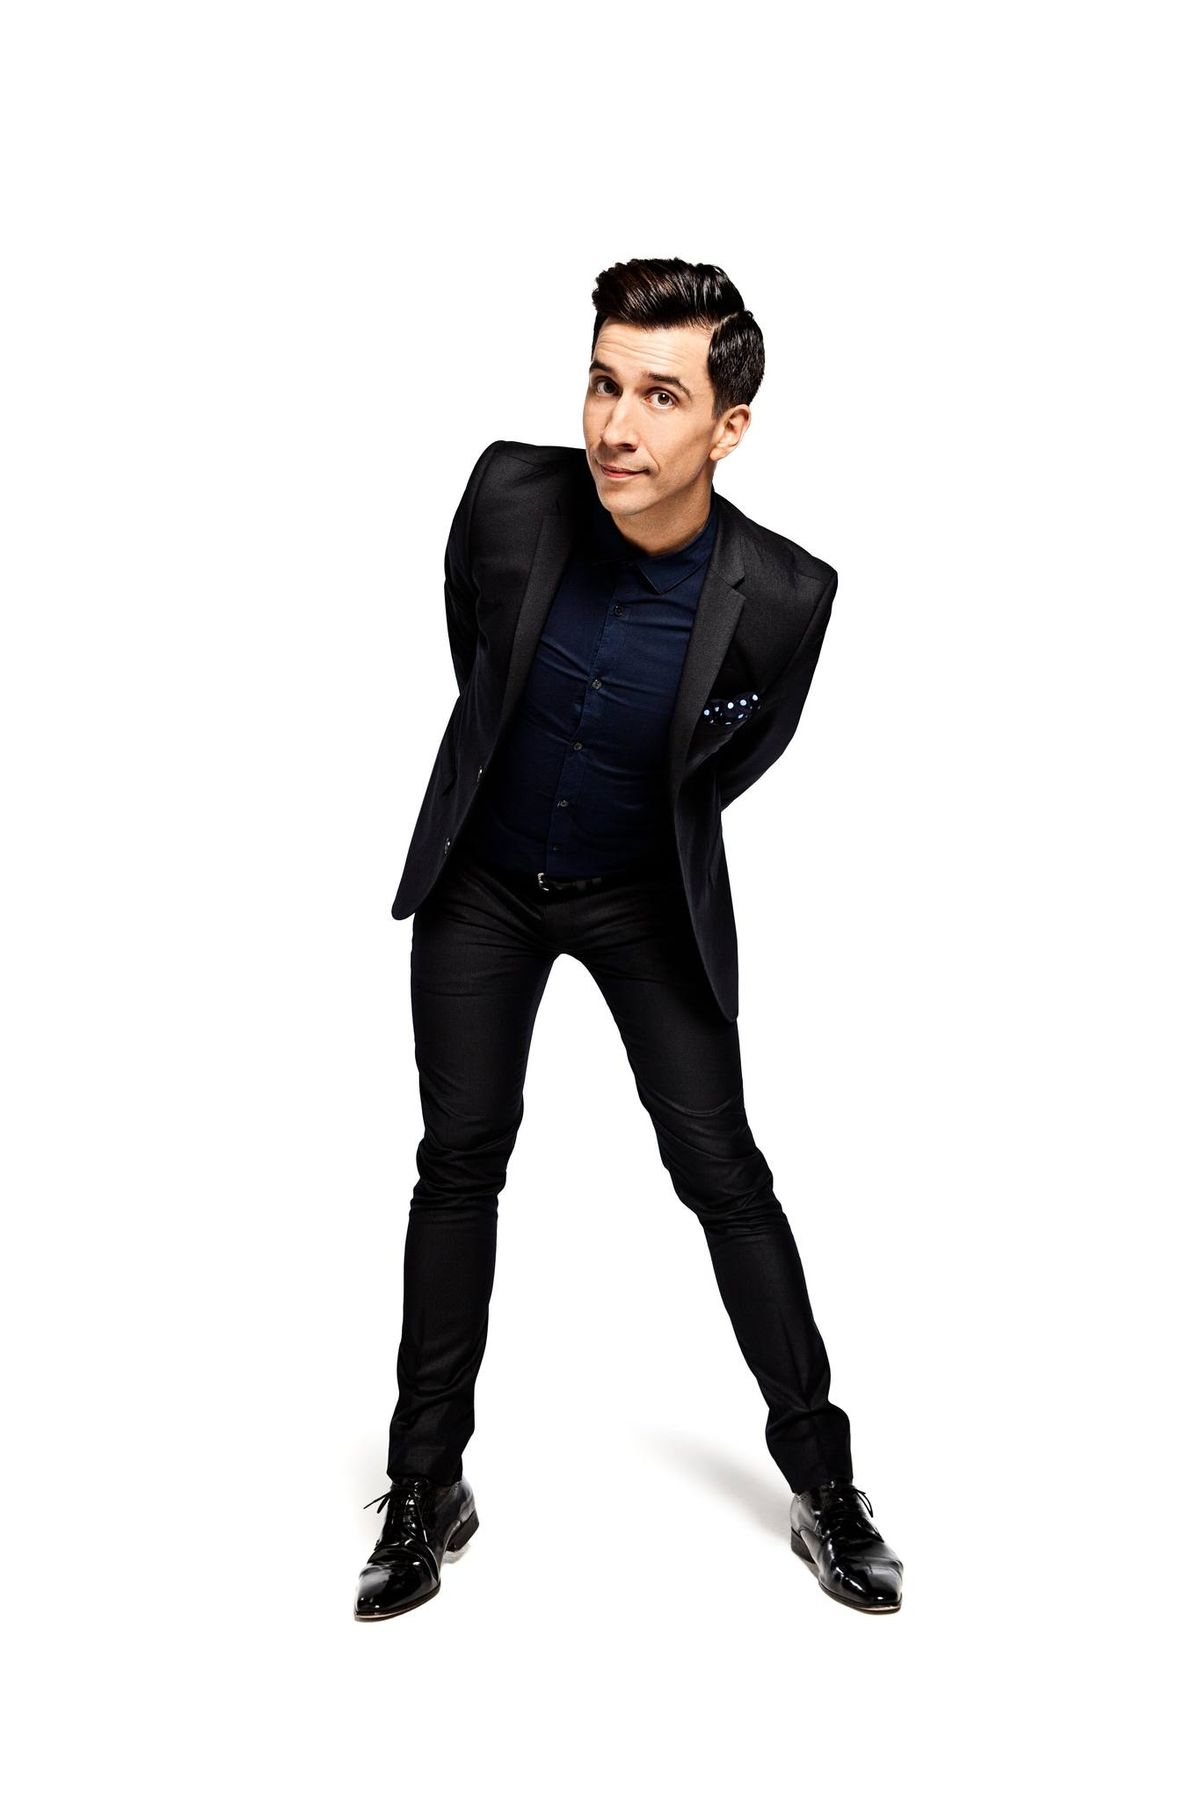 Russell Kane: Hyperactive